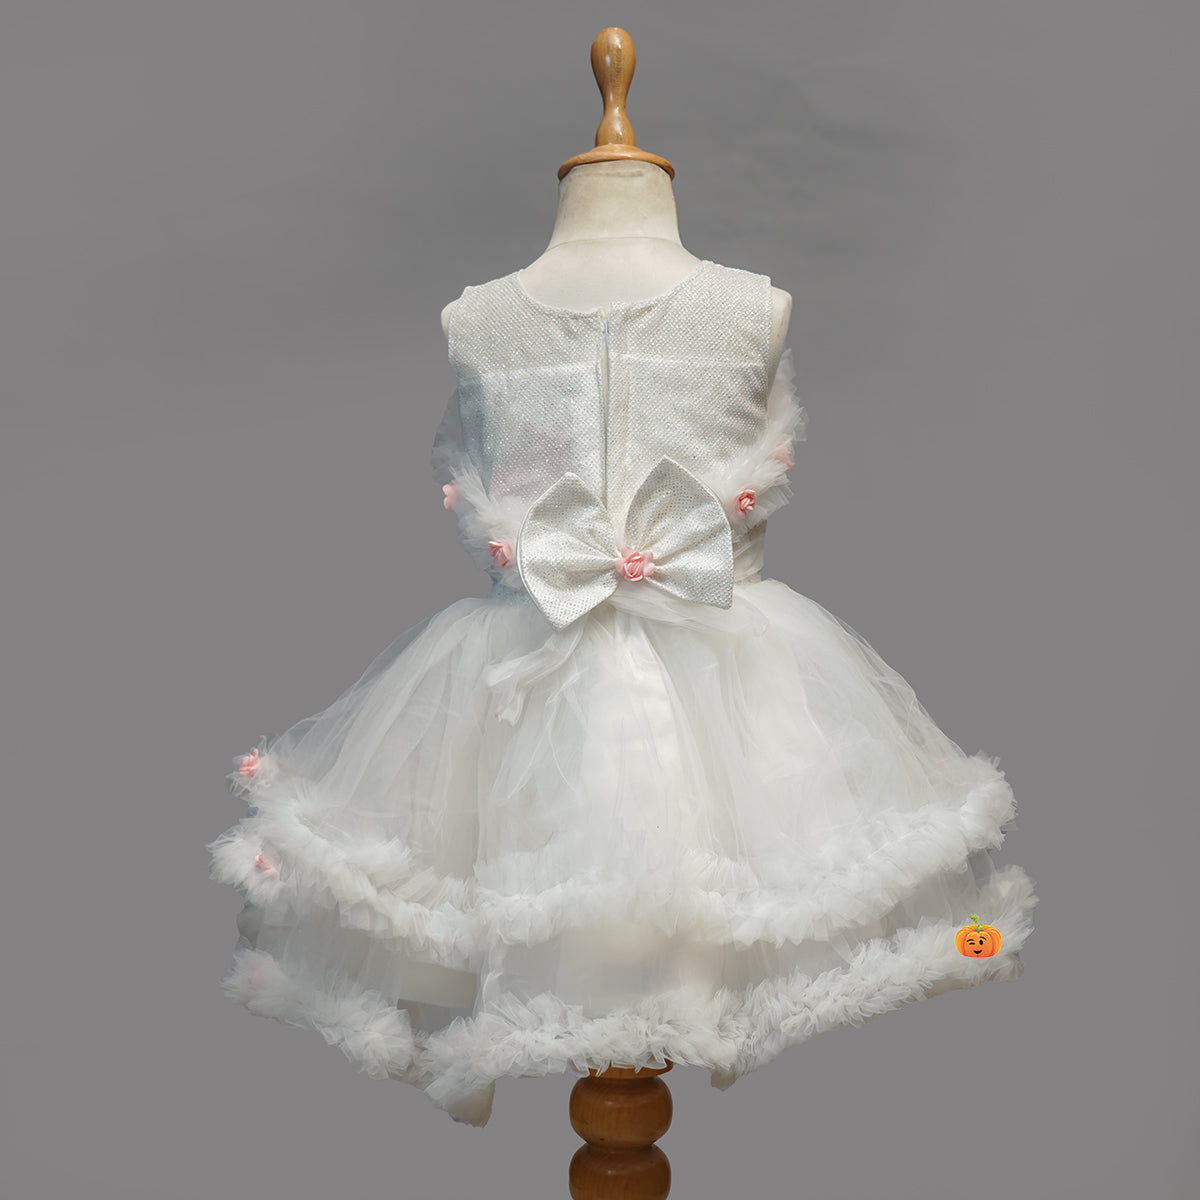 Buy Kids White Gown - White Party Wear Girl Designer Gown